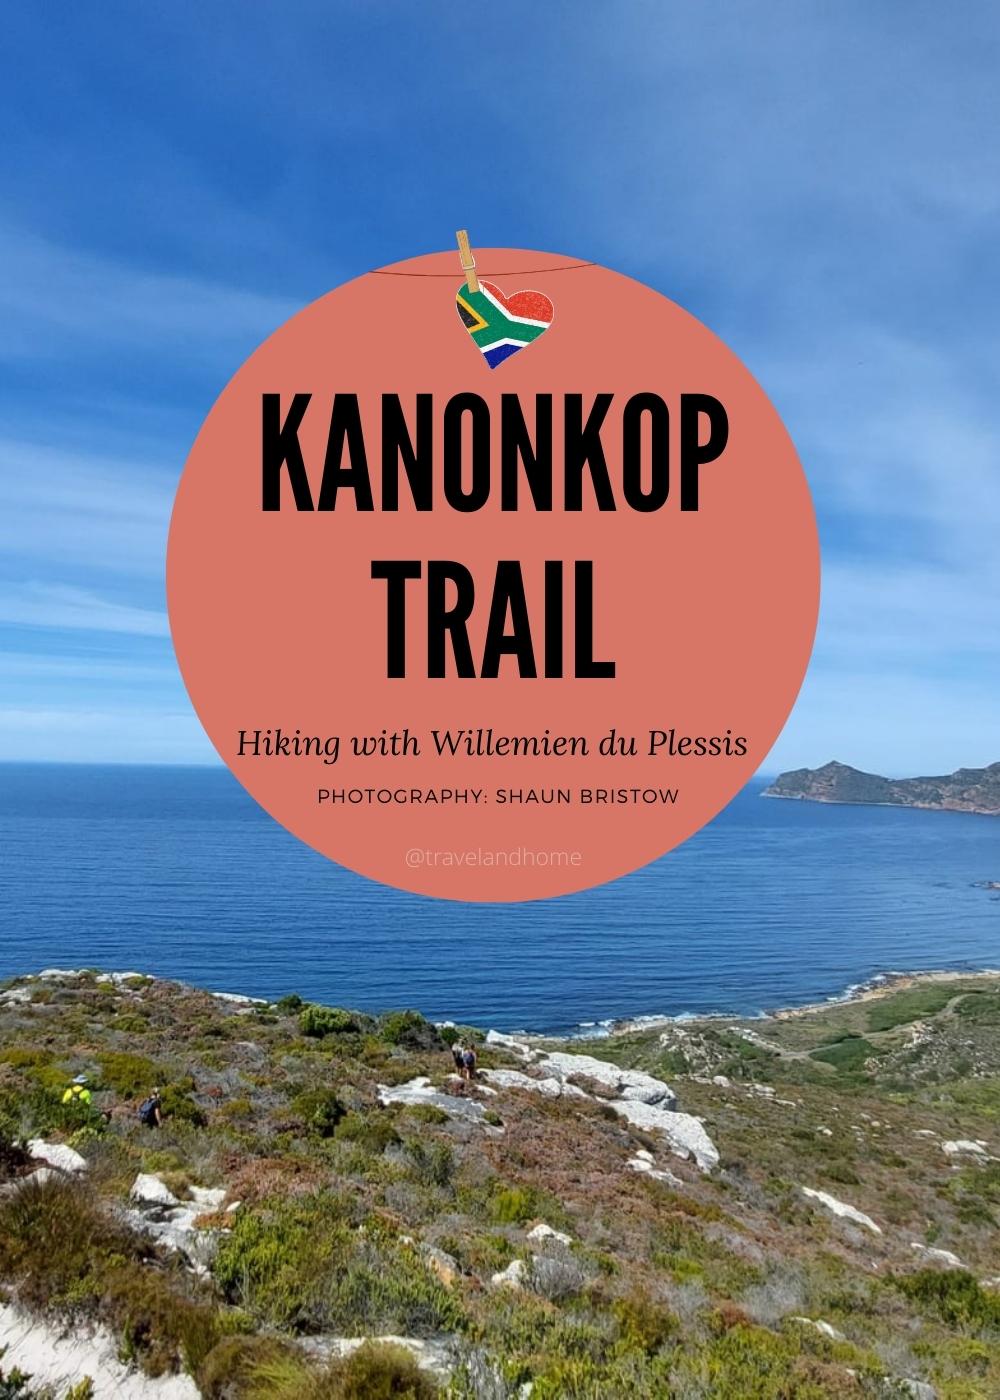 Best hiking trails in Western Cape Kanonkop Trail with Willemien du Plessis and Shaun Bristow